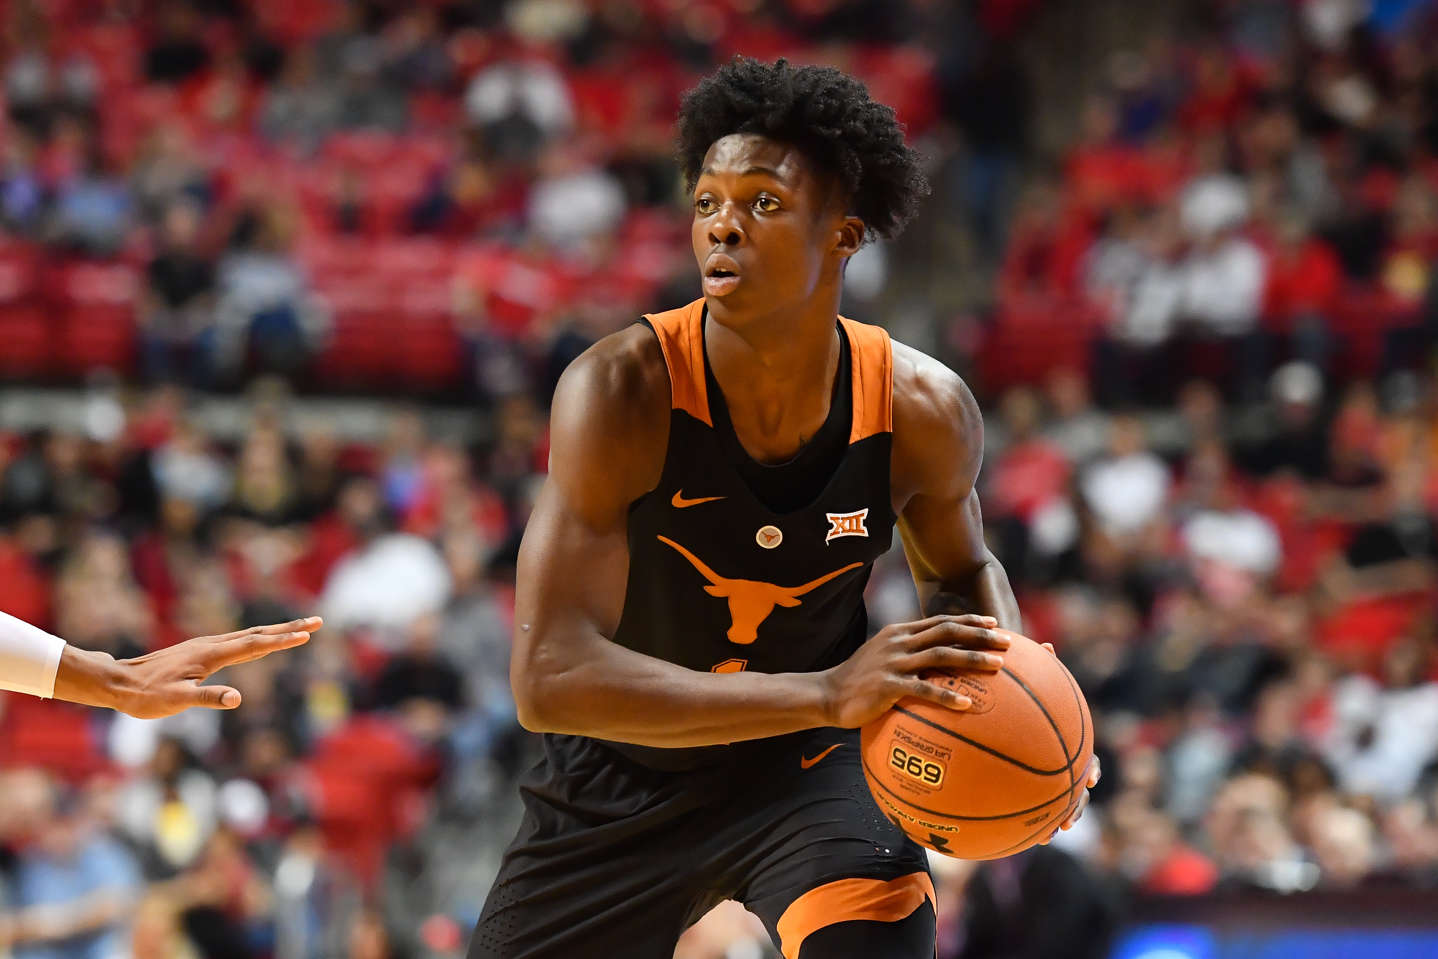 CAPTION: LUBBOCK, TX - MARCH 1: Andrew Jones #1 of the Texas Longhorns handles the ball during the game against the Texas Tech Red Raiders on March 1, 2017 at United Supermarkets Arena in Lubbock, Texas. Texas Tech defeated Texas 67-57.